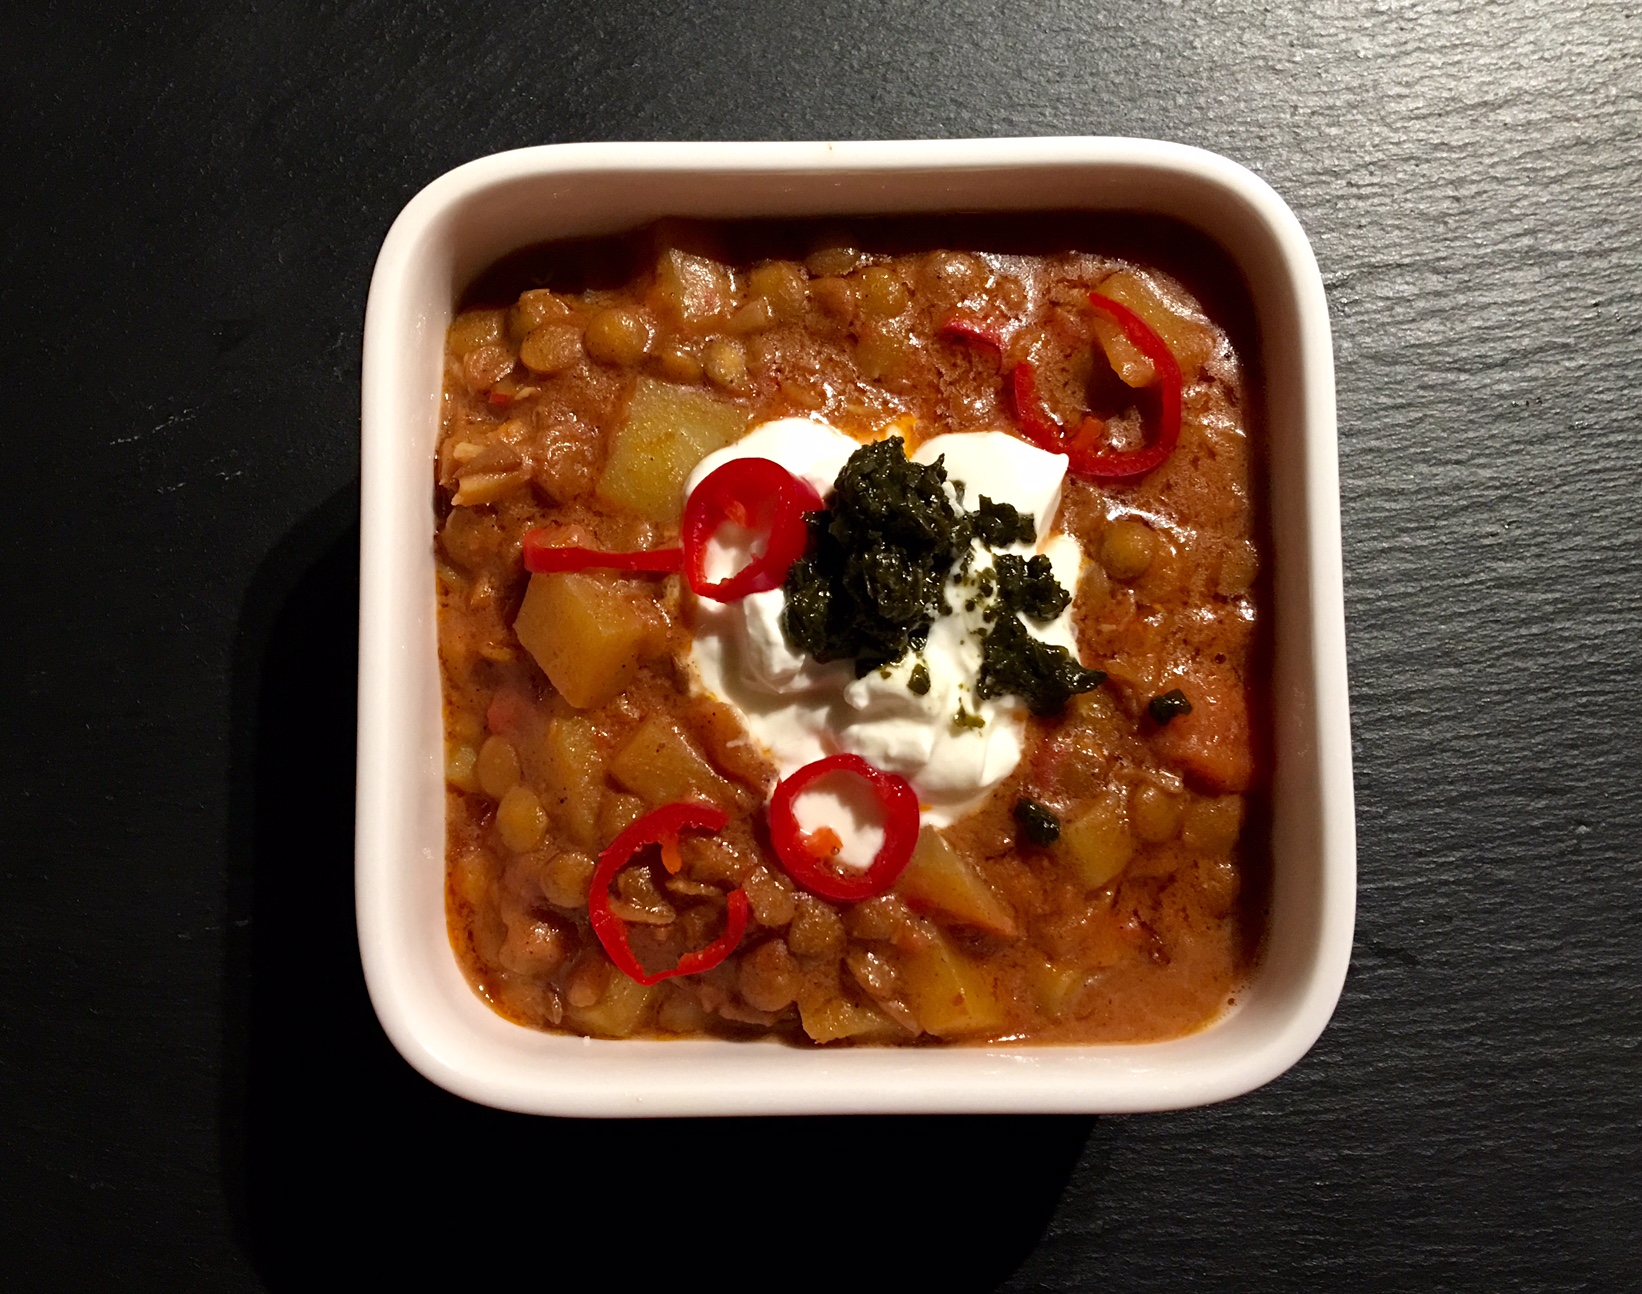 Dal indisches Linsencurry vegan